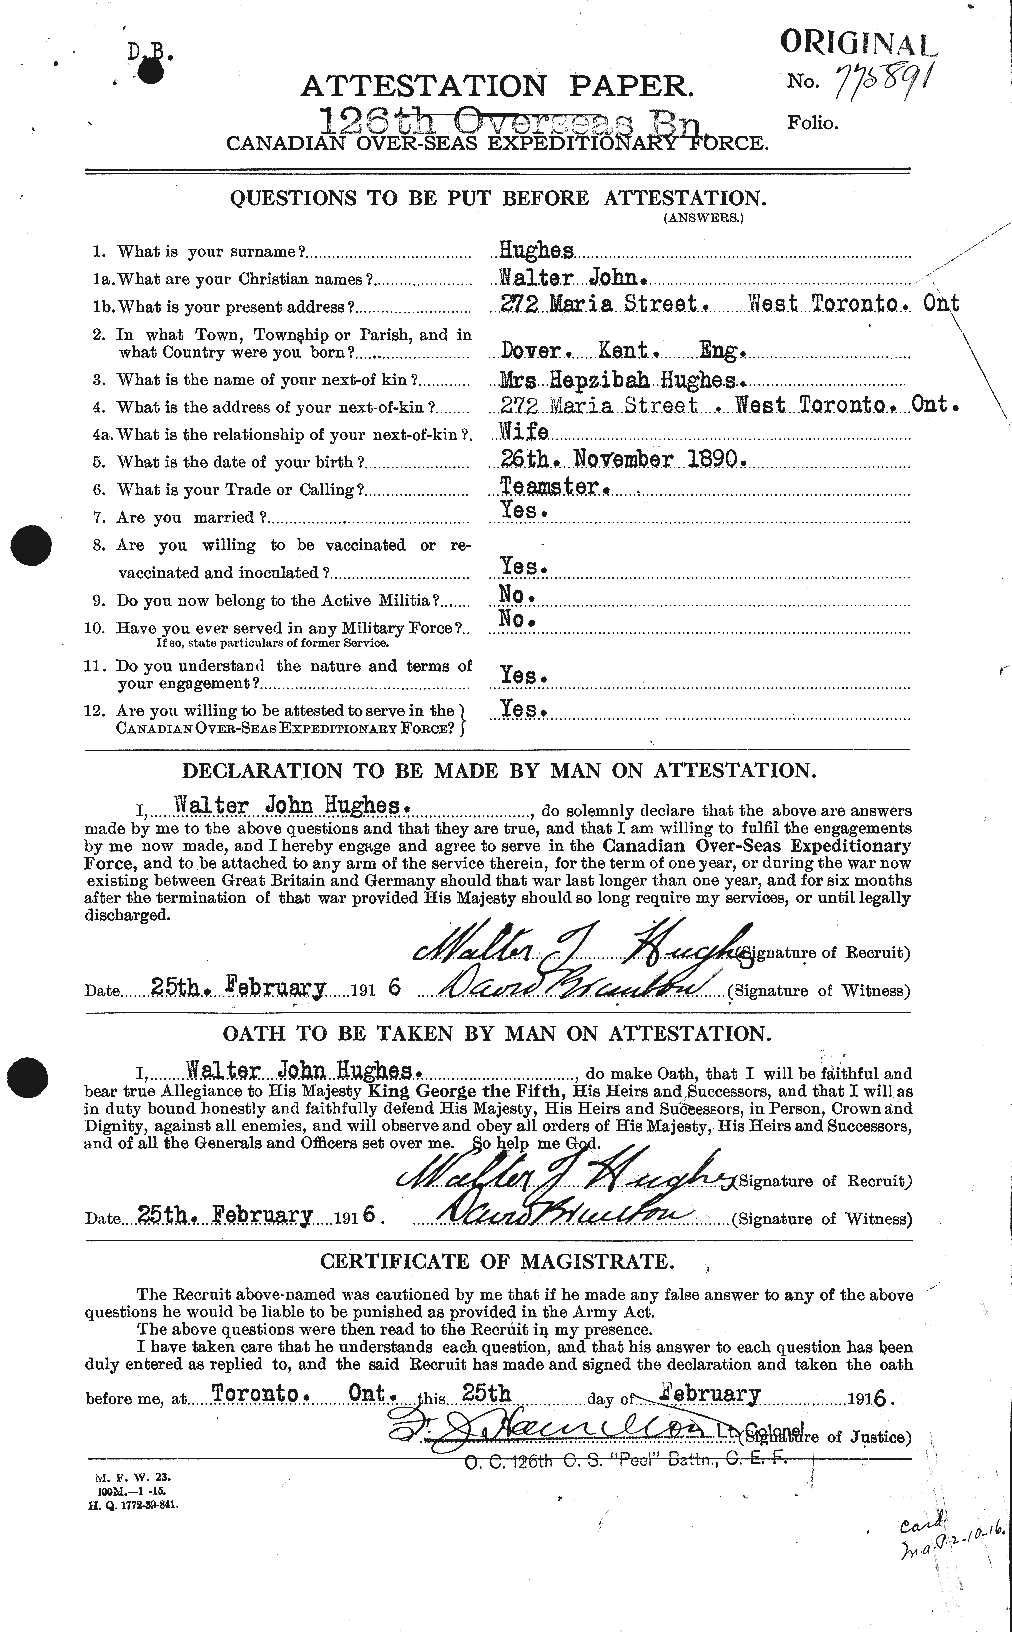 Personnel Records of the First World War - CEF 405862a